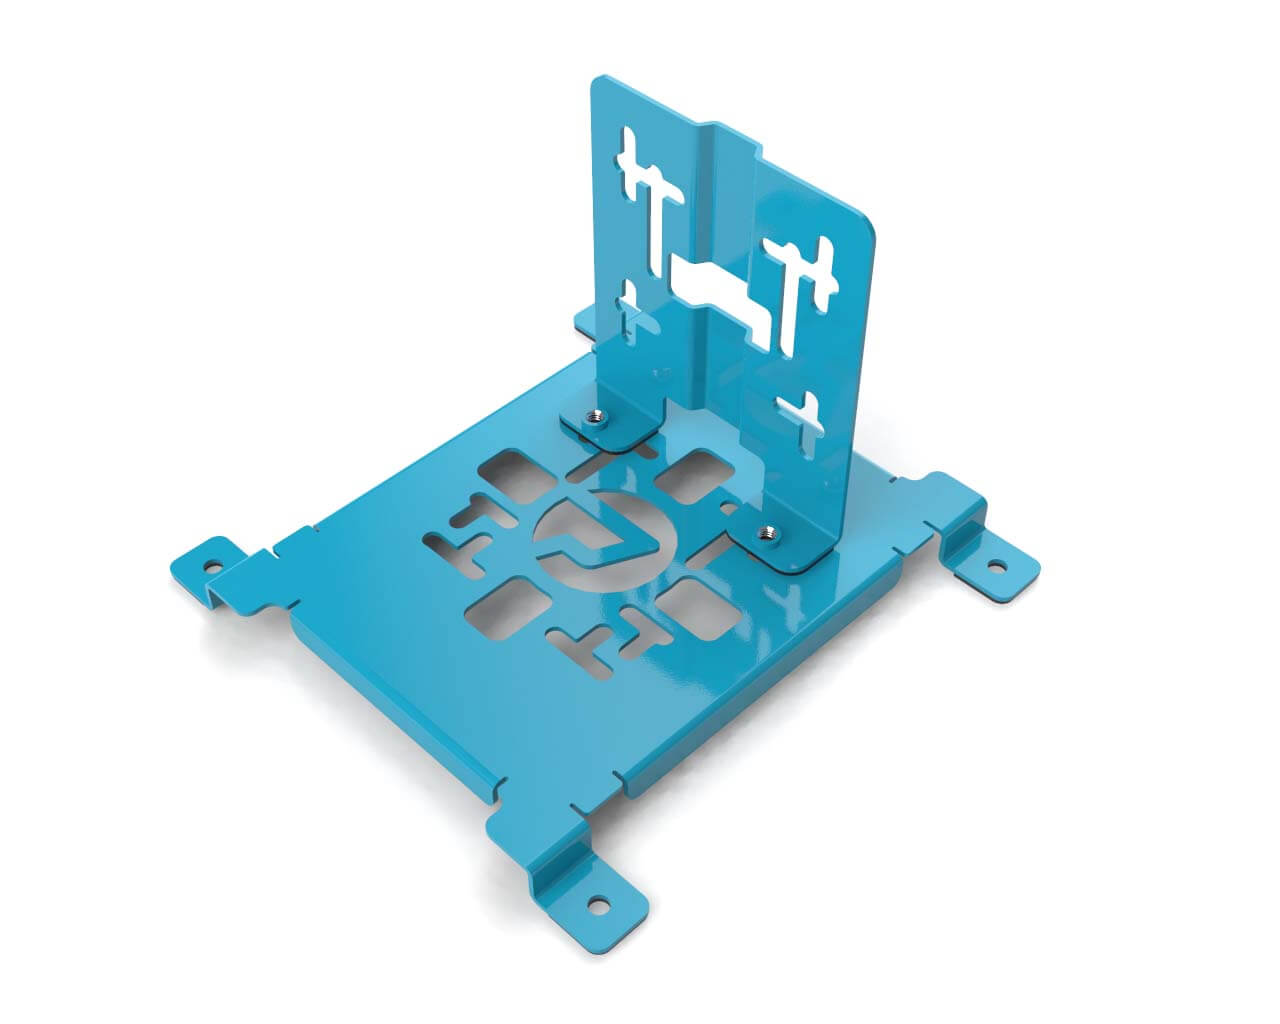 PrimoChill SX Universal Spider Mount Bracket Kit - 140mm Series - PrimoChill - KEEPING IT COOL Sky Blue